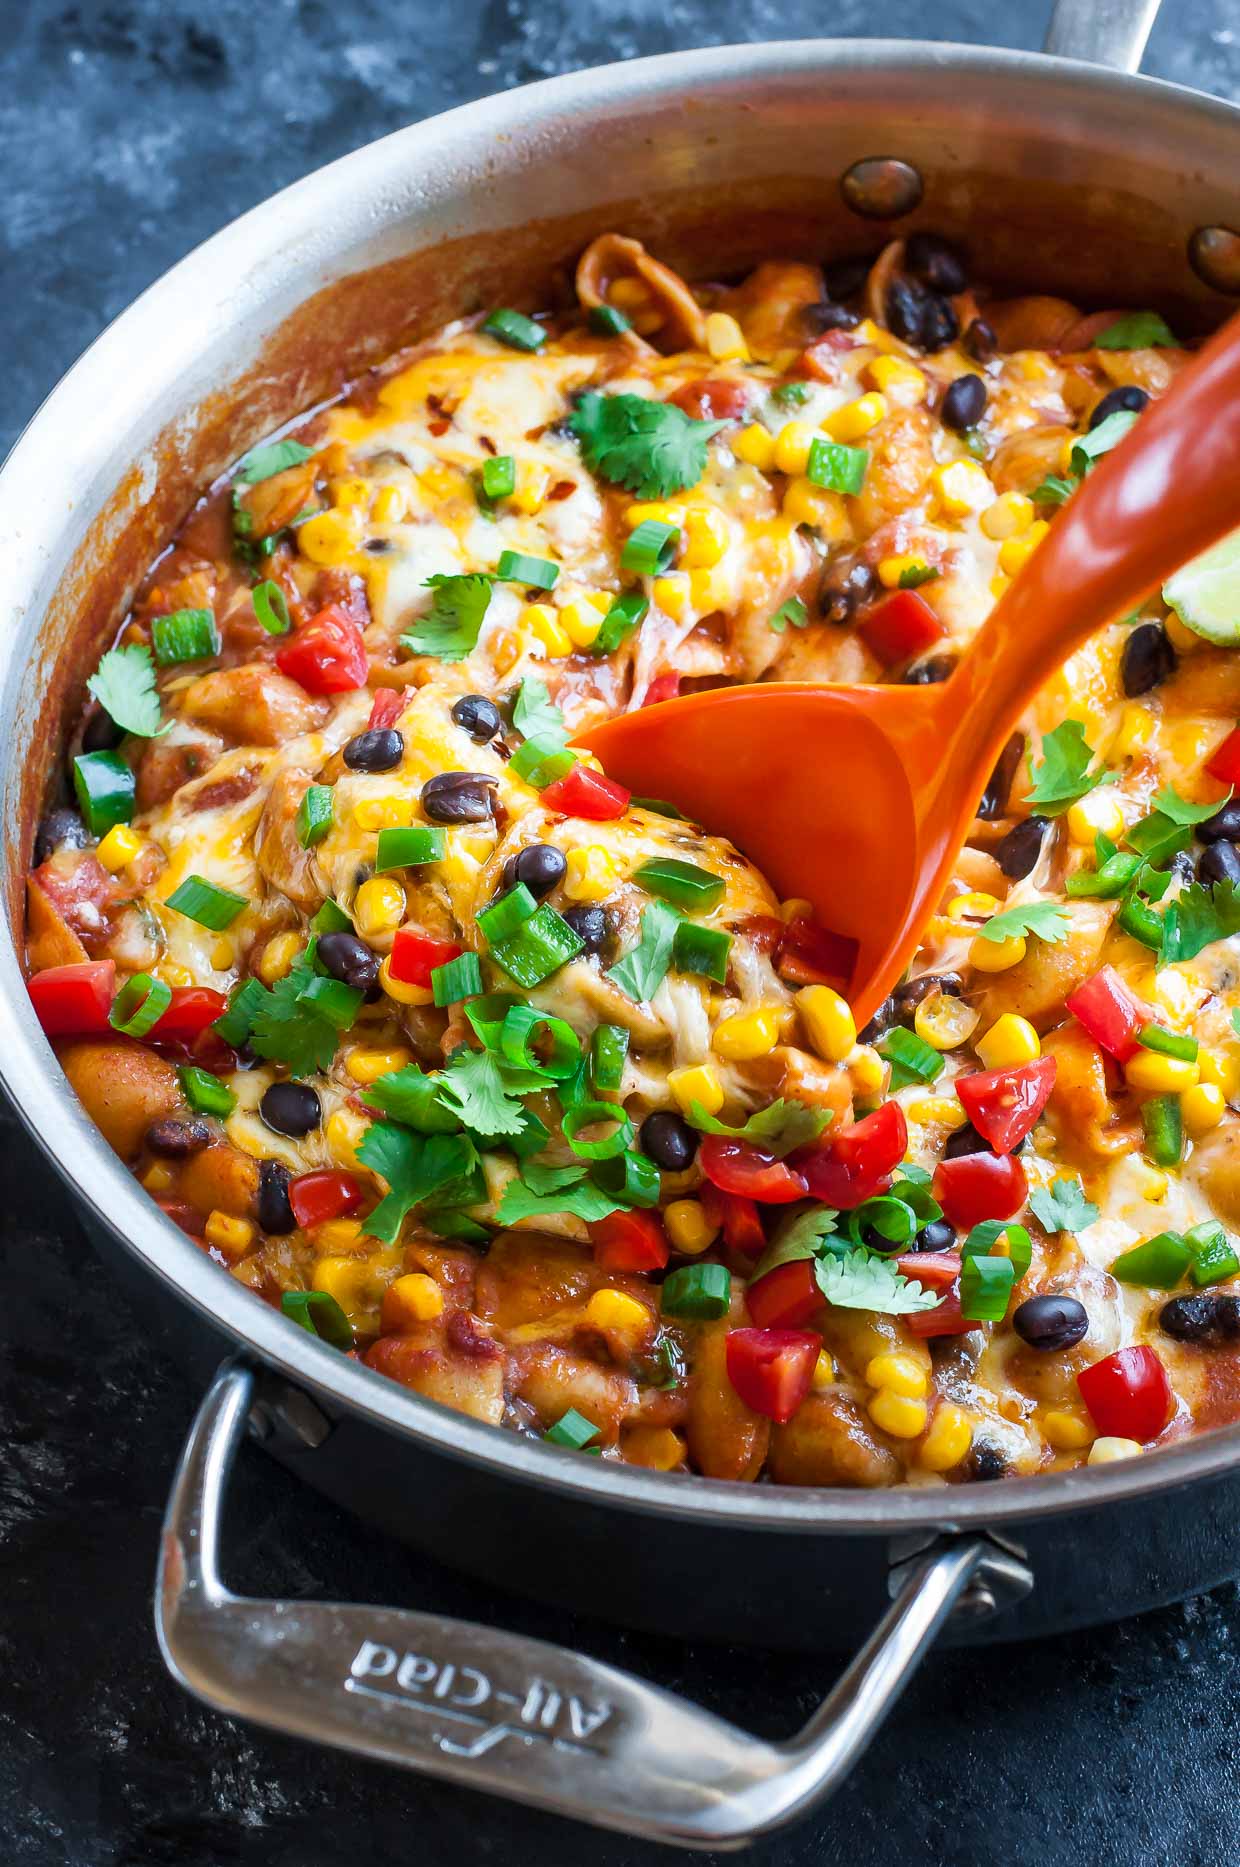 Healthy One-Pot Enchilada Pasta: Gluten-Free + Vegetarian - this tasty vegetarian dish is quick, easy, and ready to rock your plate!